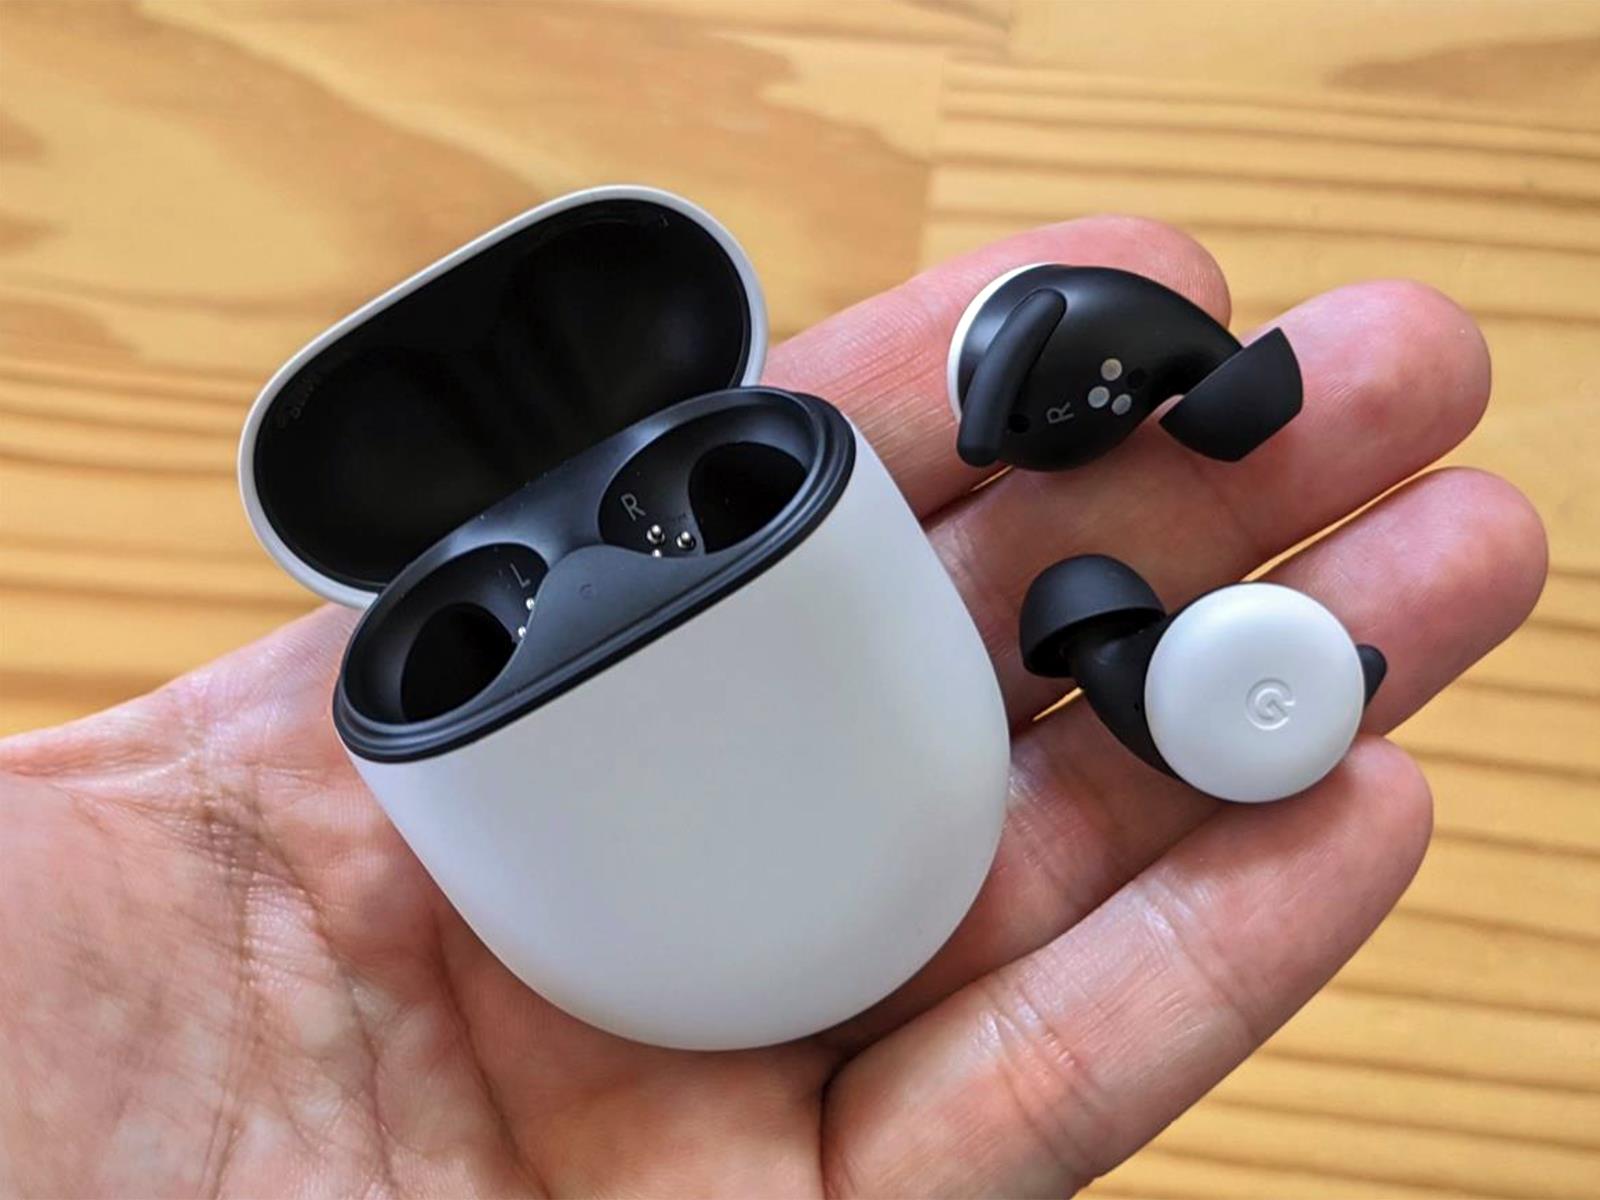 The Google Pixel Buds 2 headphones are updated to the beast - LK Techsky - Latest Technology News